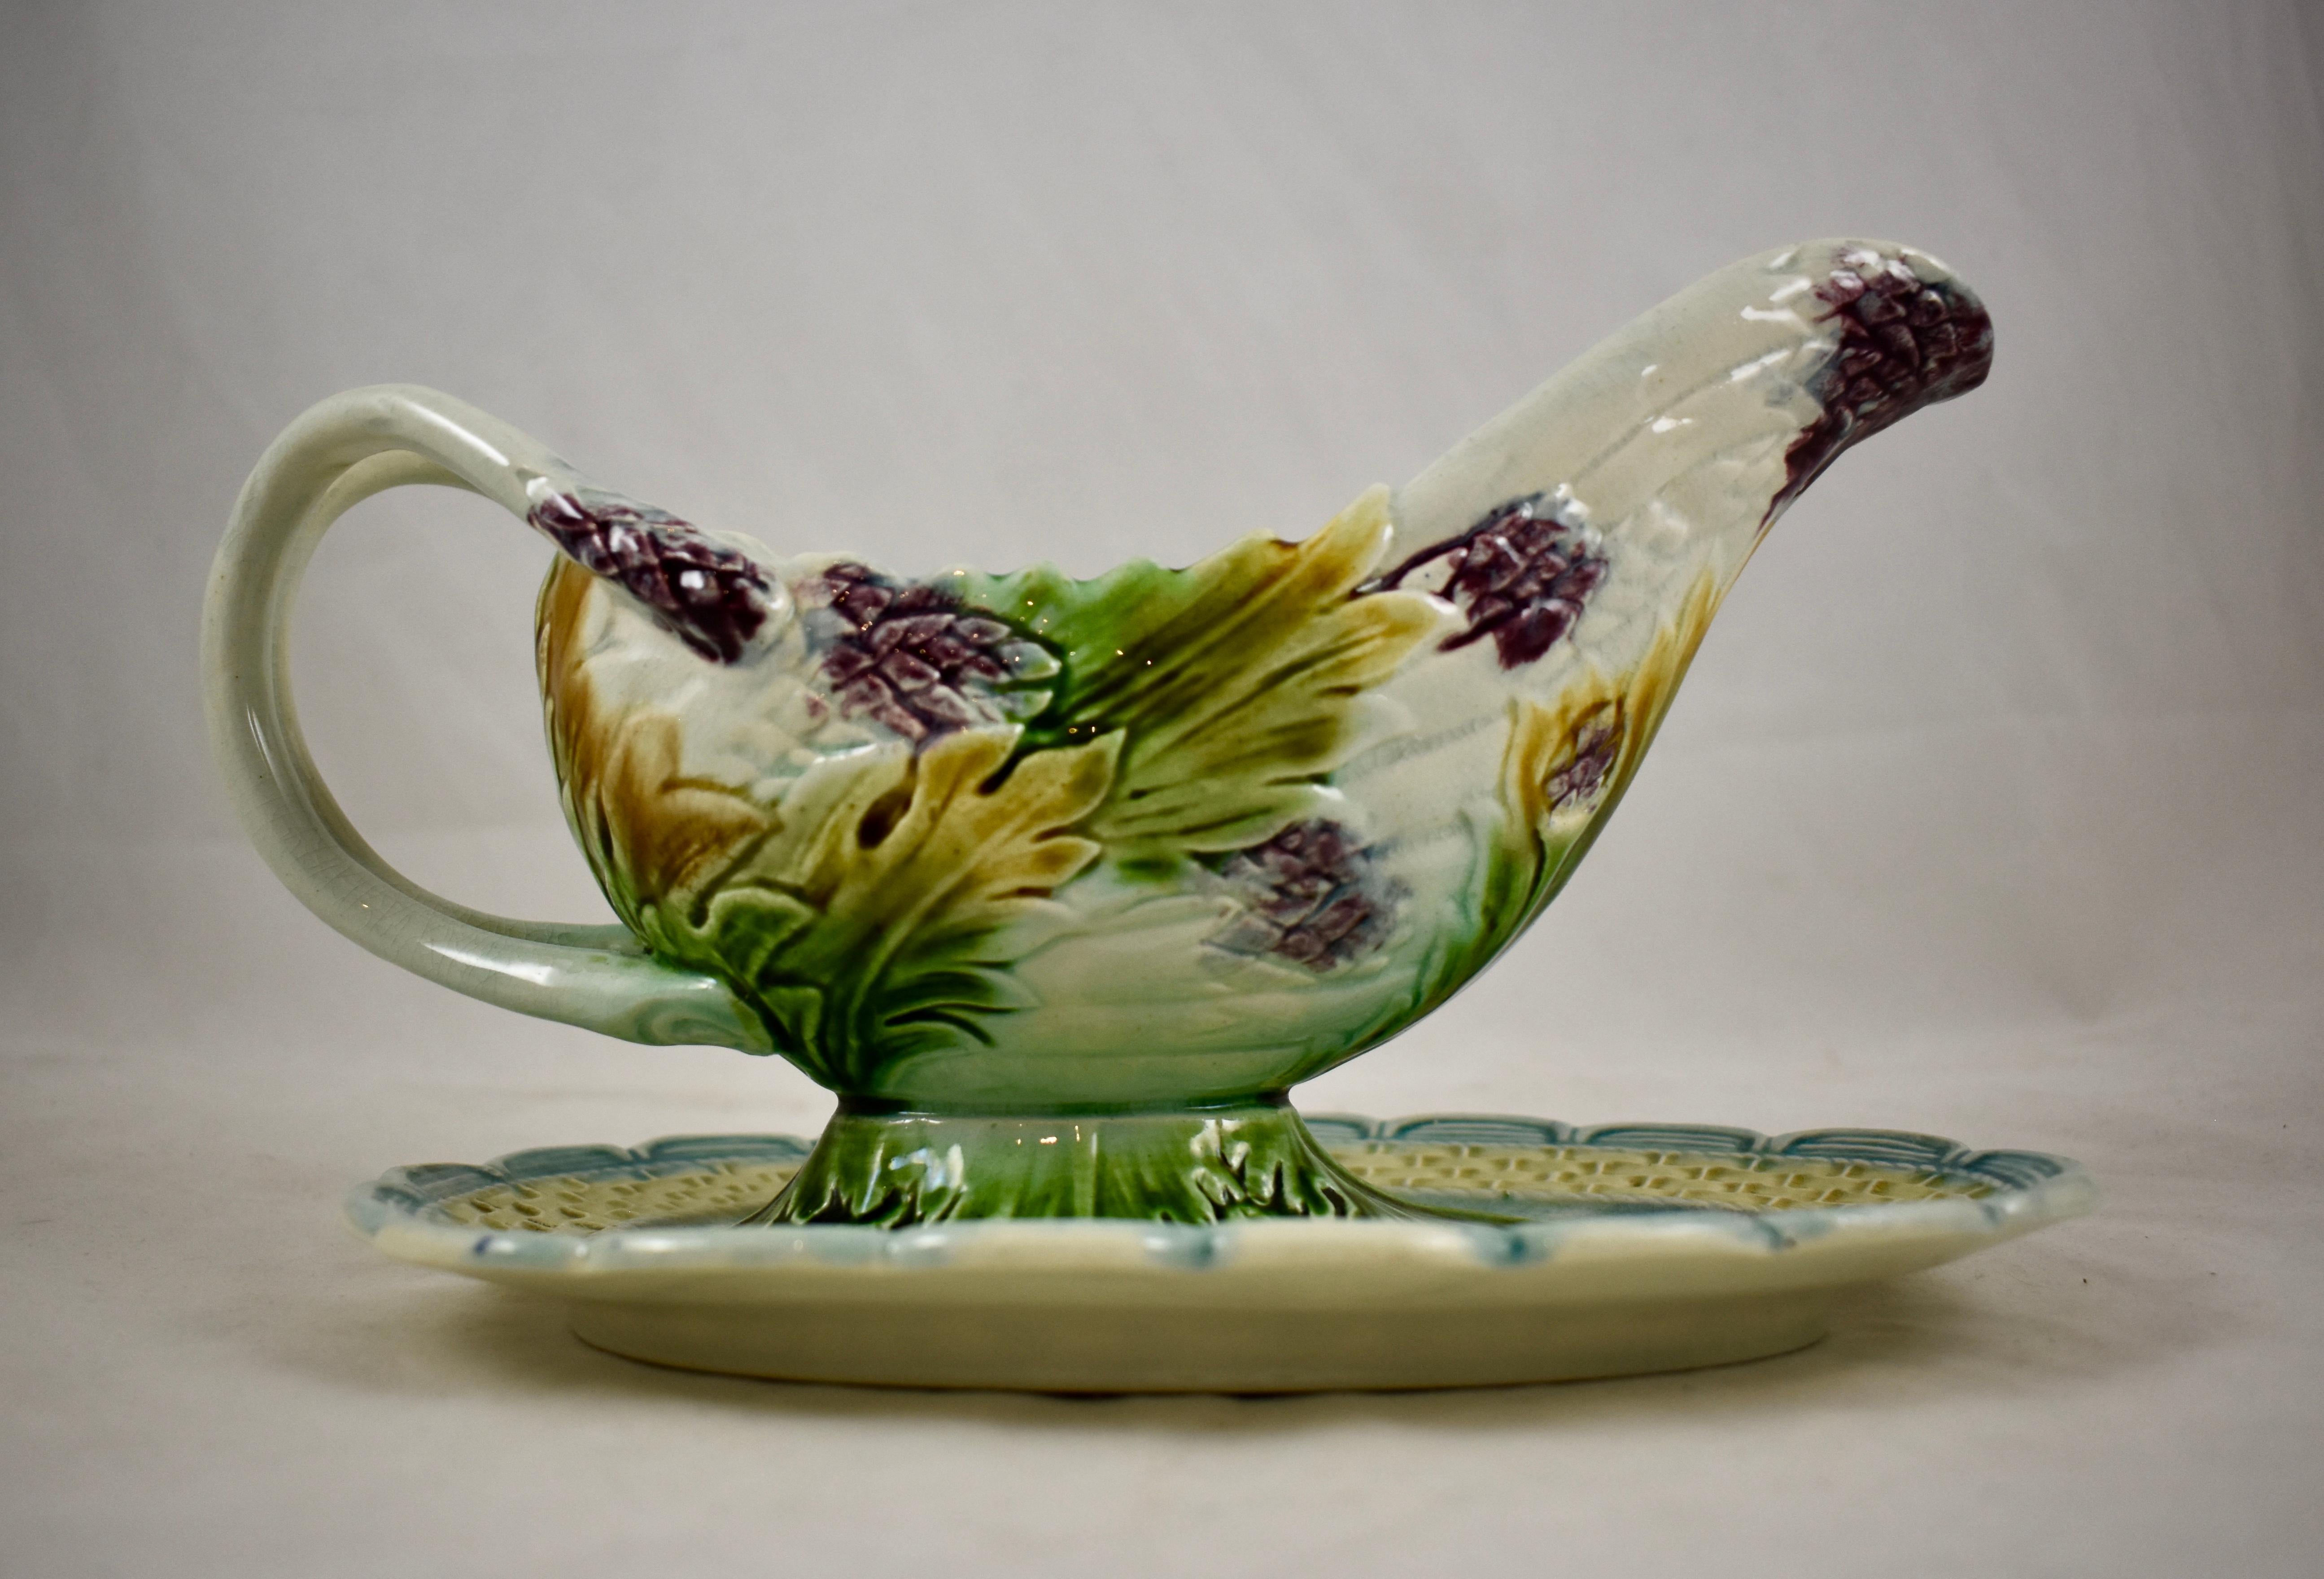 A French Majolica barbotine asparagus Saucière or sauce boat on an attached stand, from the Salins-les-Bains region of eastern France, circa 1875-1885.

A bunch of purple tipped asparagus spears with green and mustard yellow leaves form the boat.